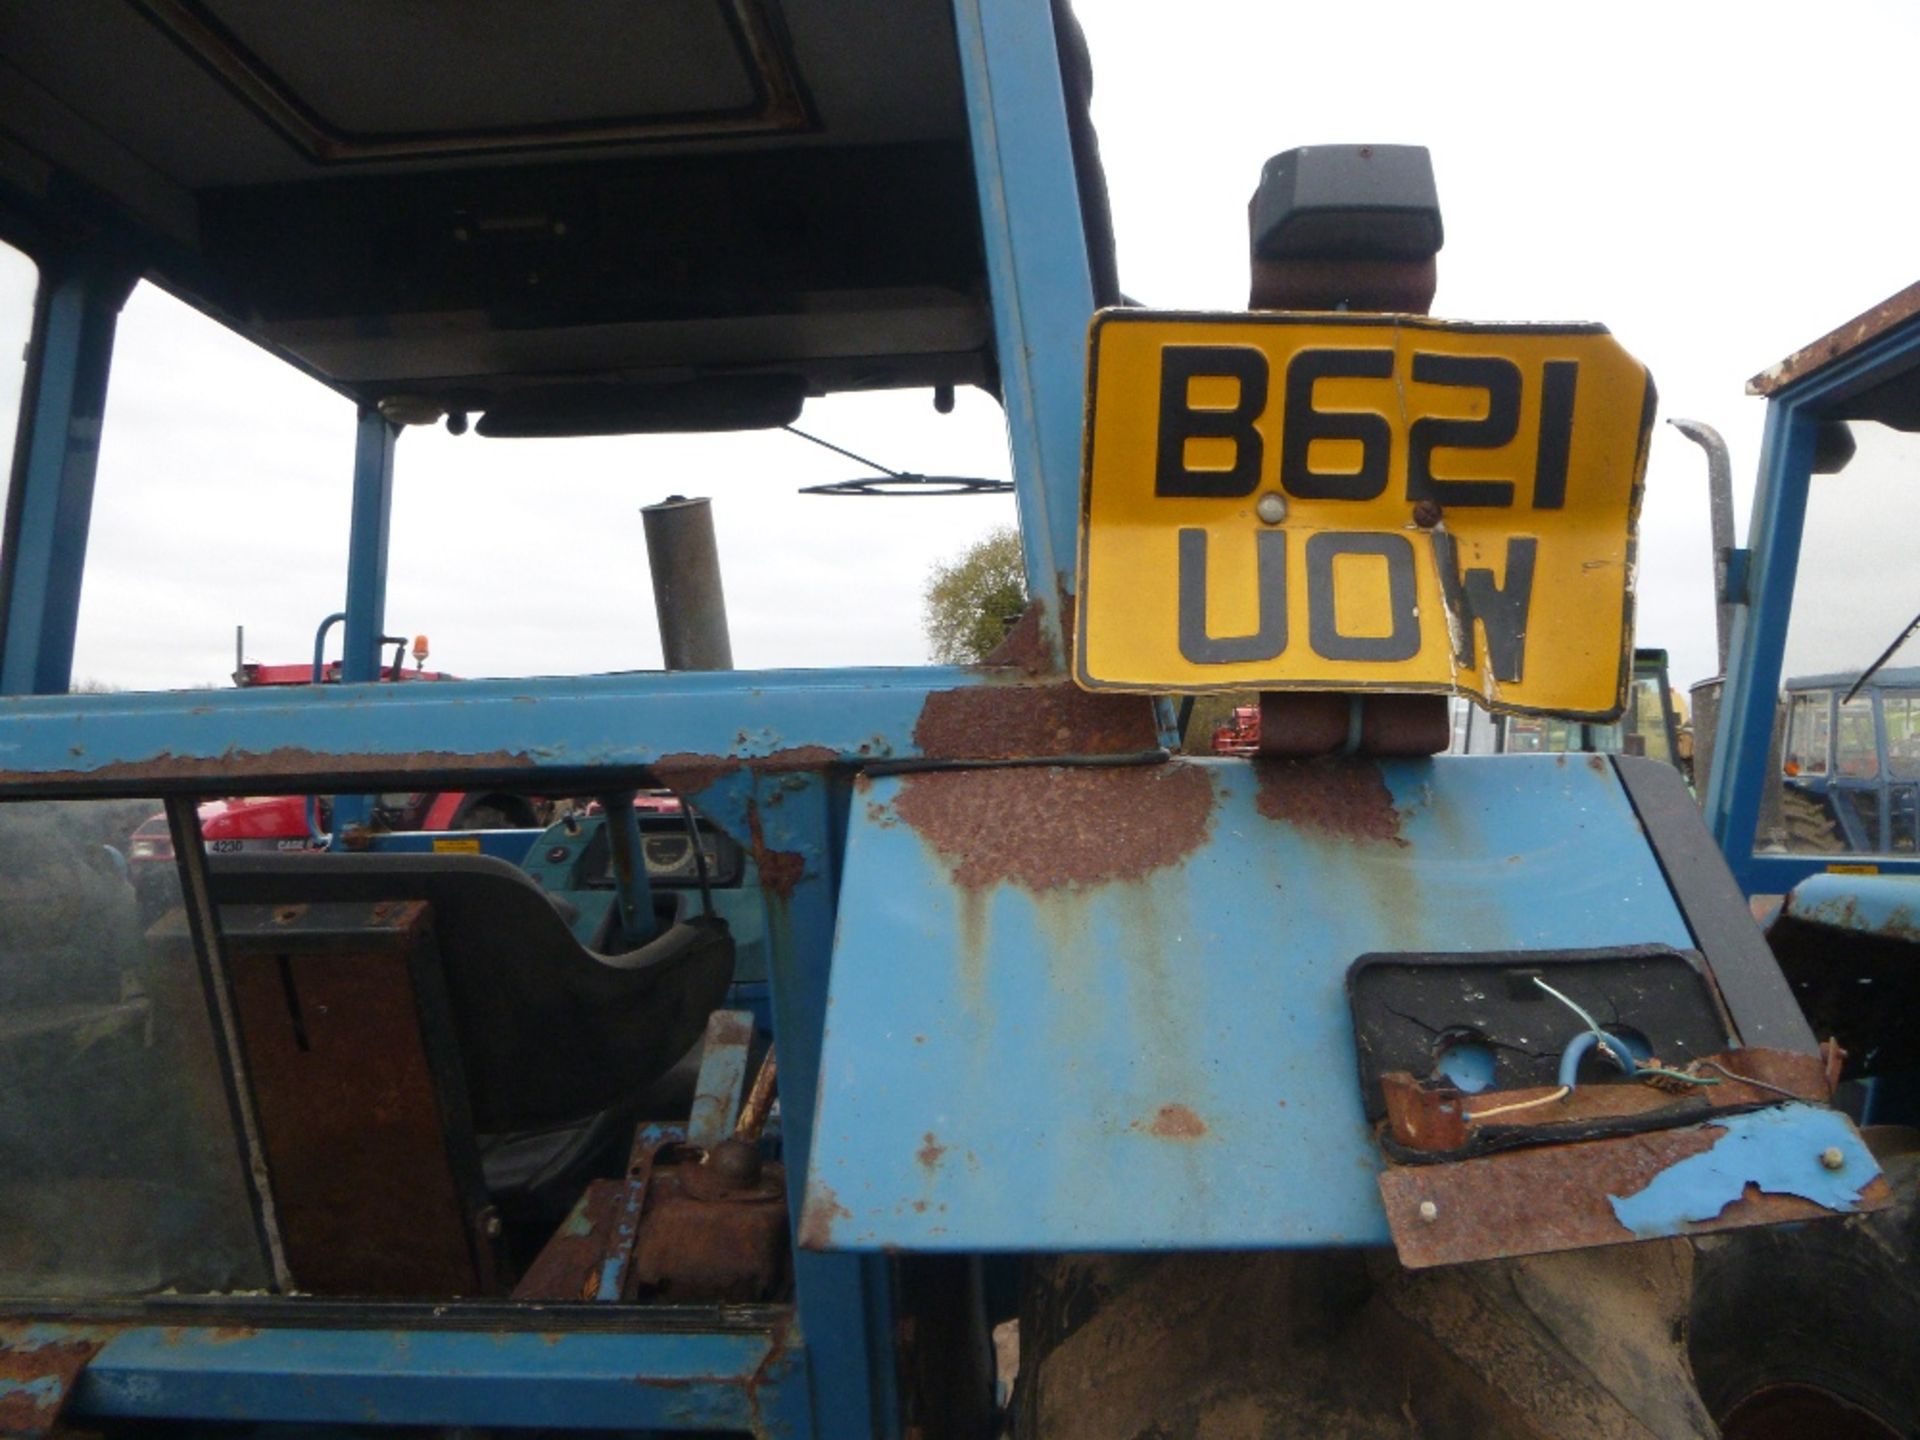 Ford 5610 2wd Tractor with Floor Change Gearbox. Reg. No. B621 UOW Ser. No. BA22021 - Image 8 of 13